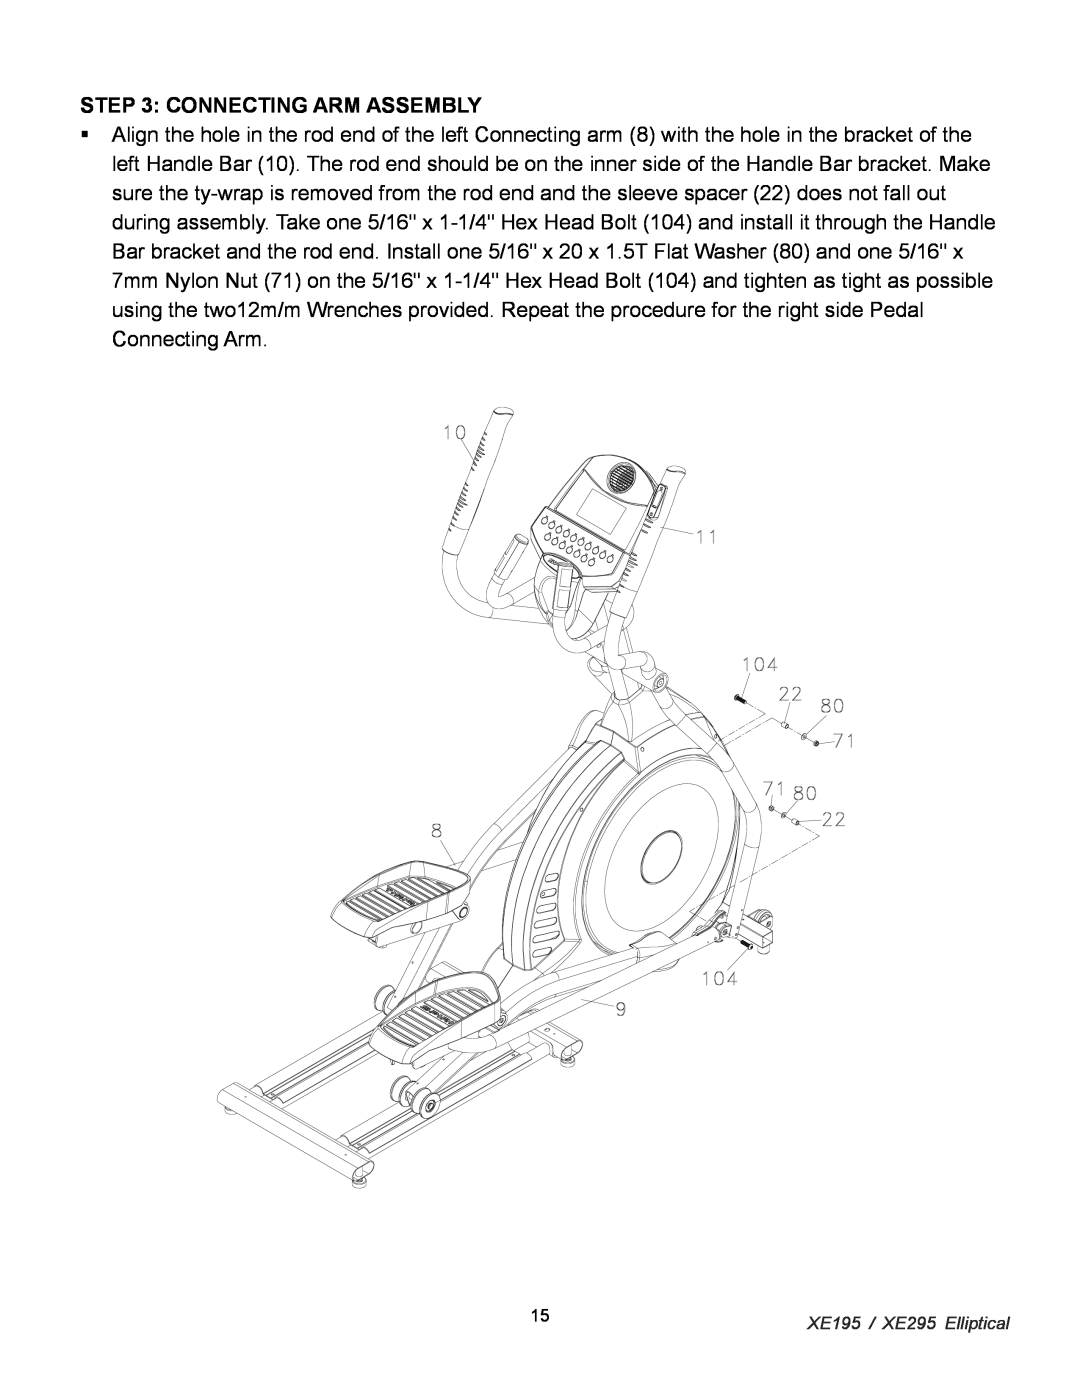 Spirit XE 295, XE 195 owner manual Connecting Arm Assembly 